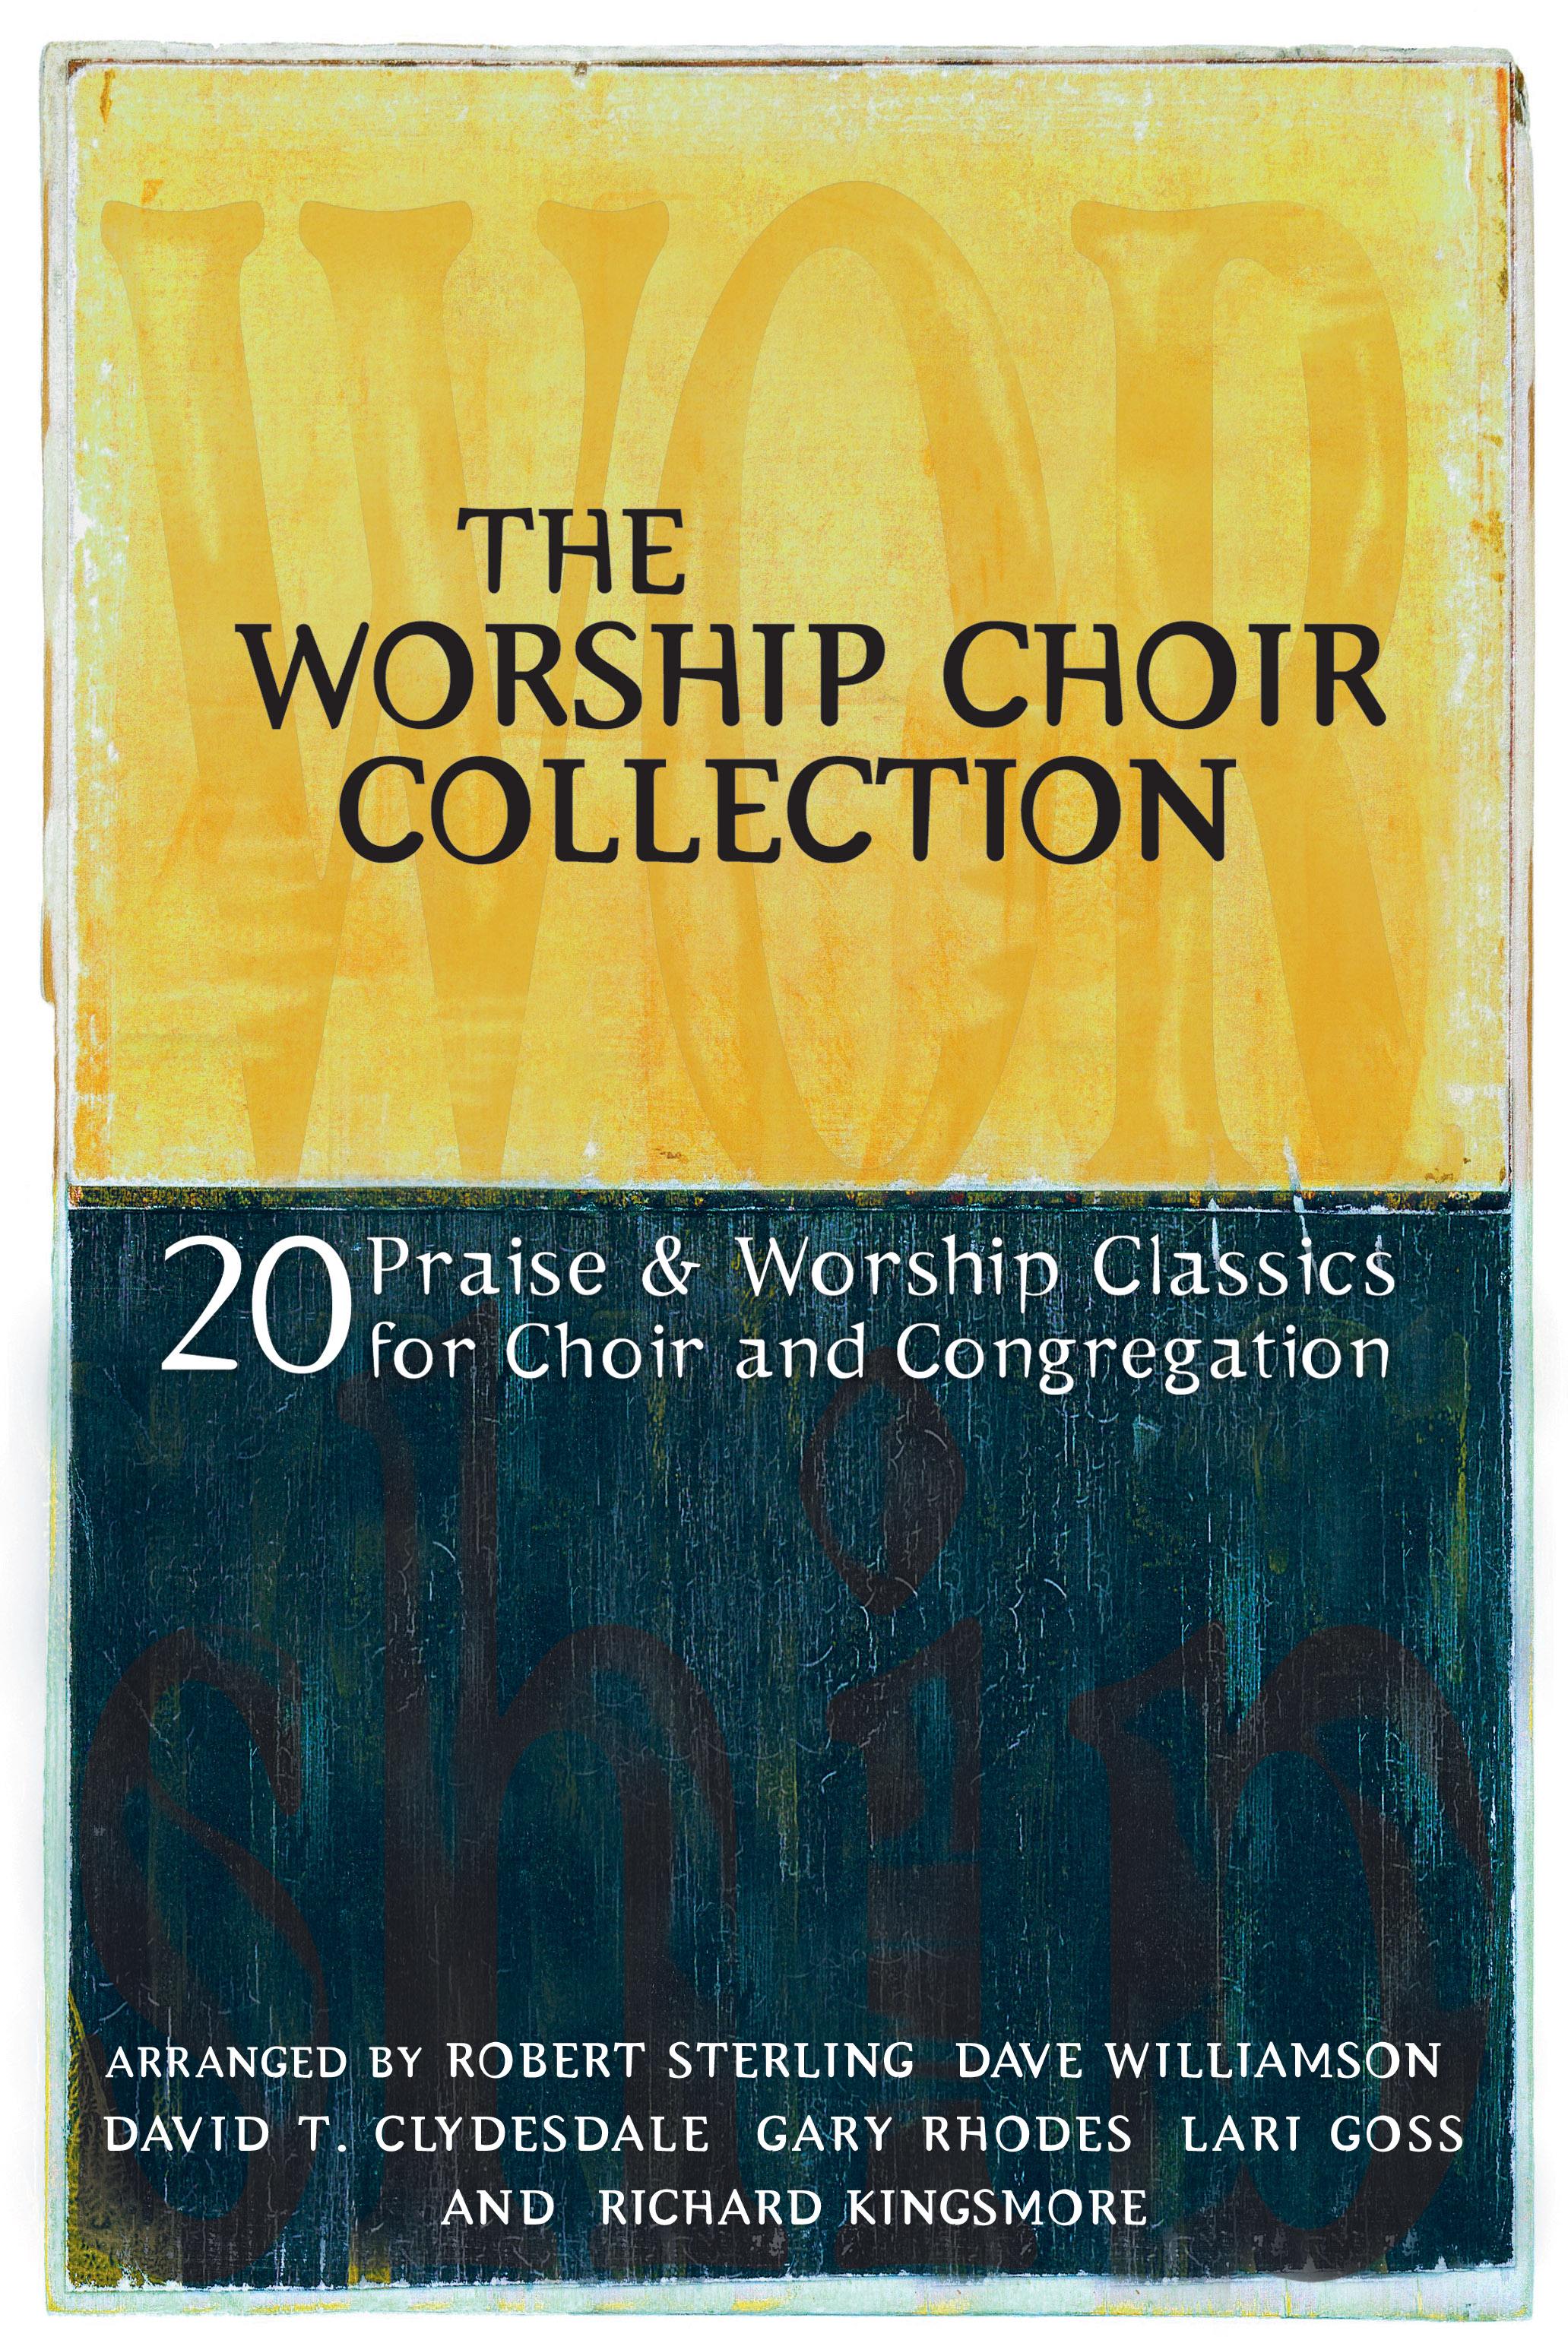 The Worship Choir Collection (악보)